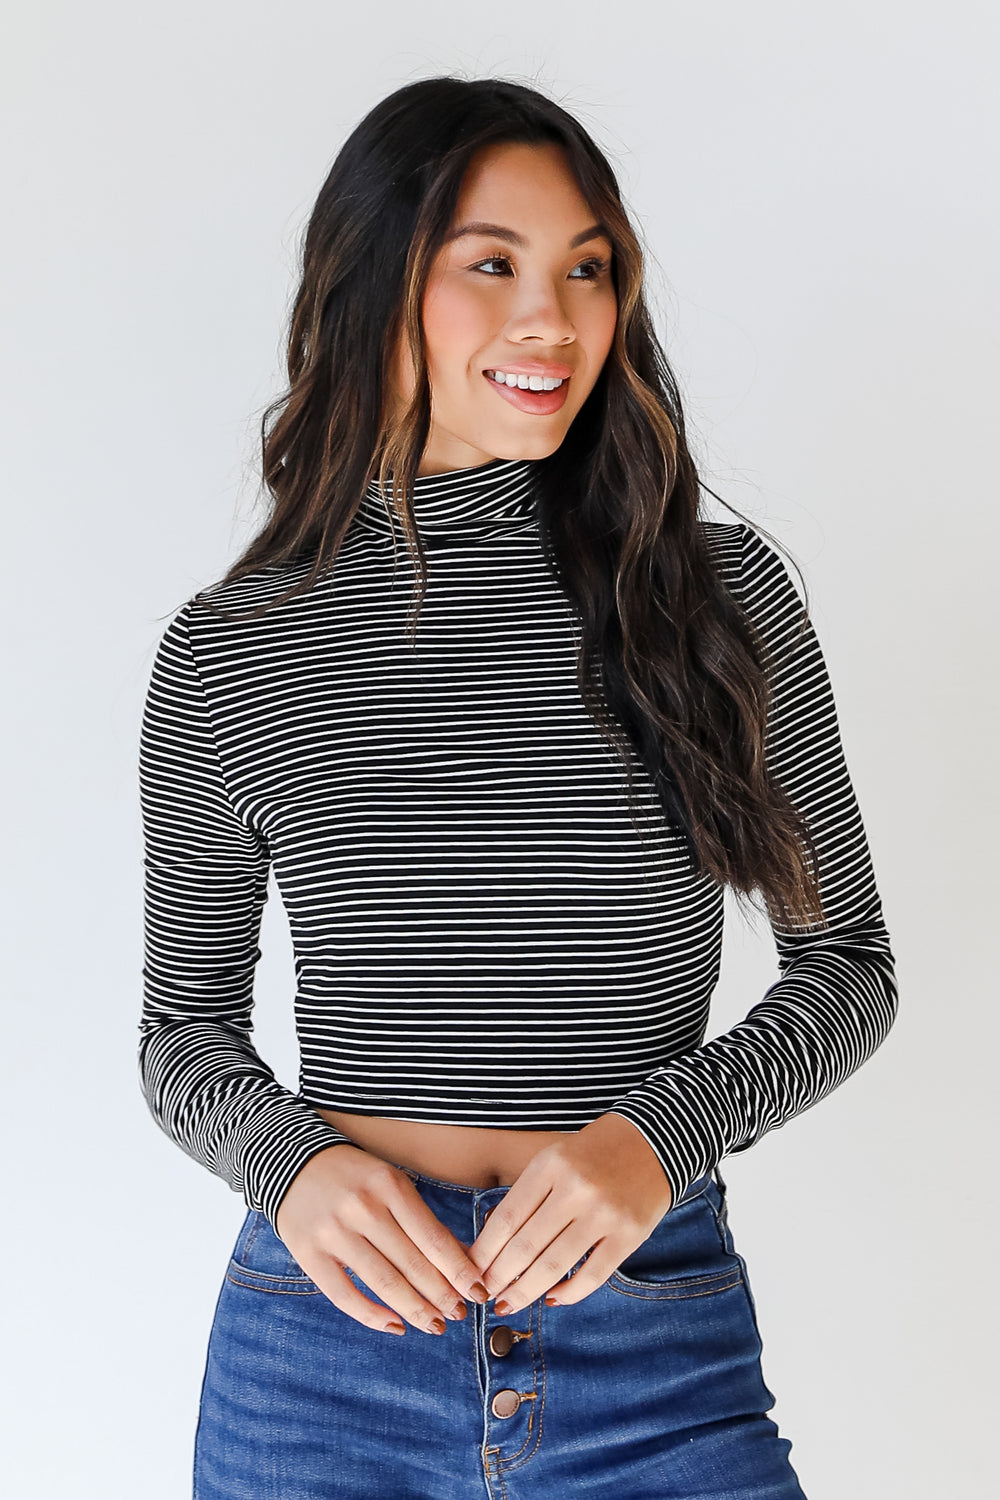 model wearing black and white striped mock neck basic top